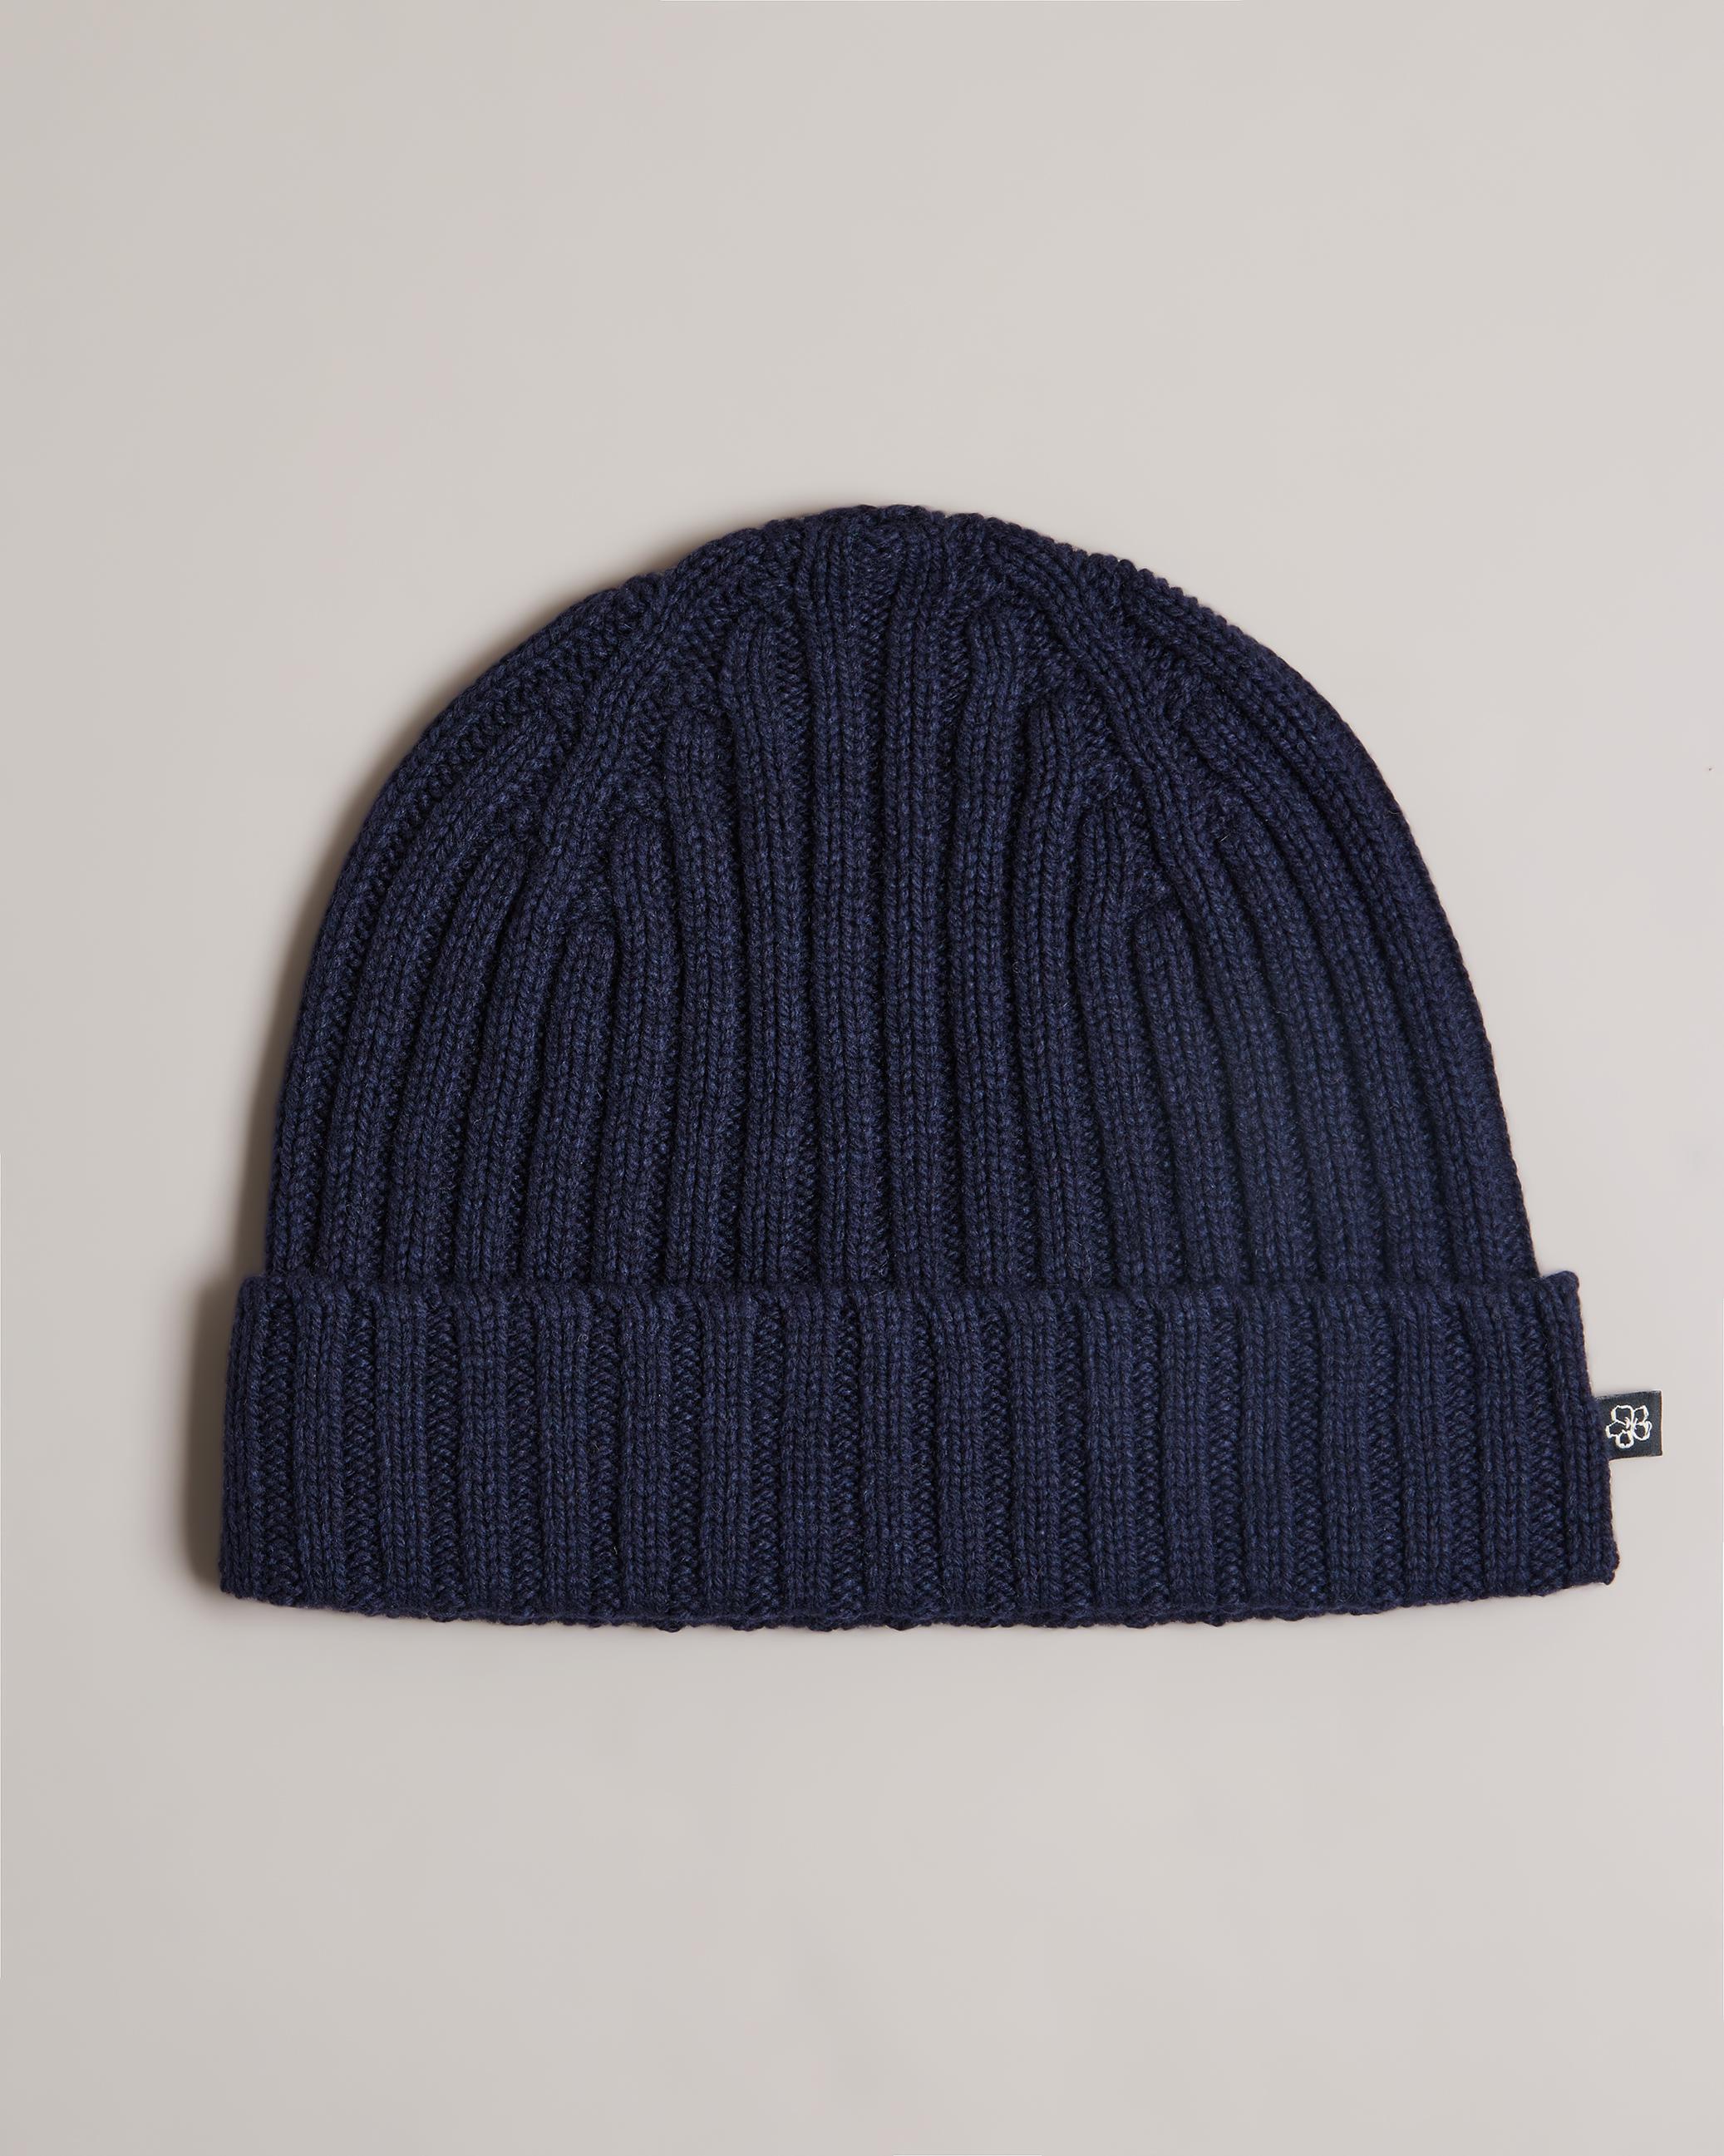 Ribbed Beanie Hat - OAKLAND - Navy by TED BAKER